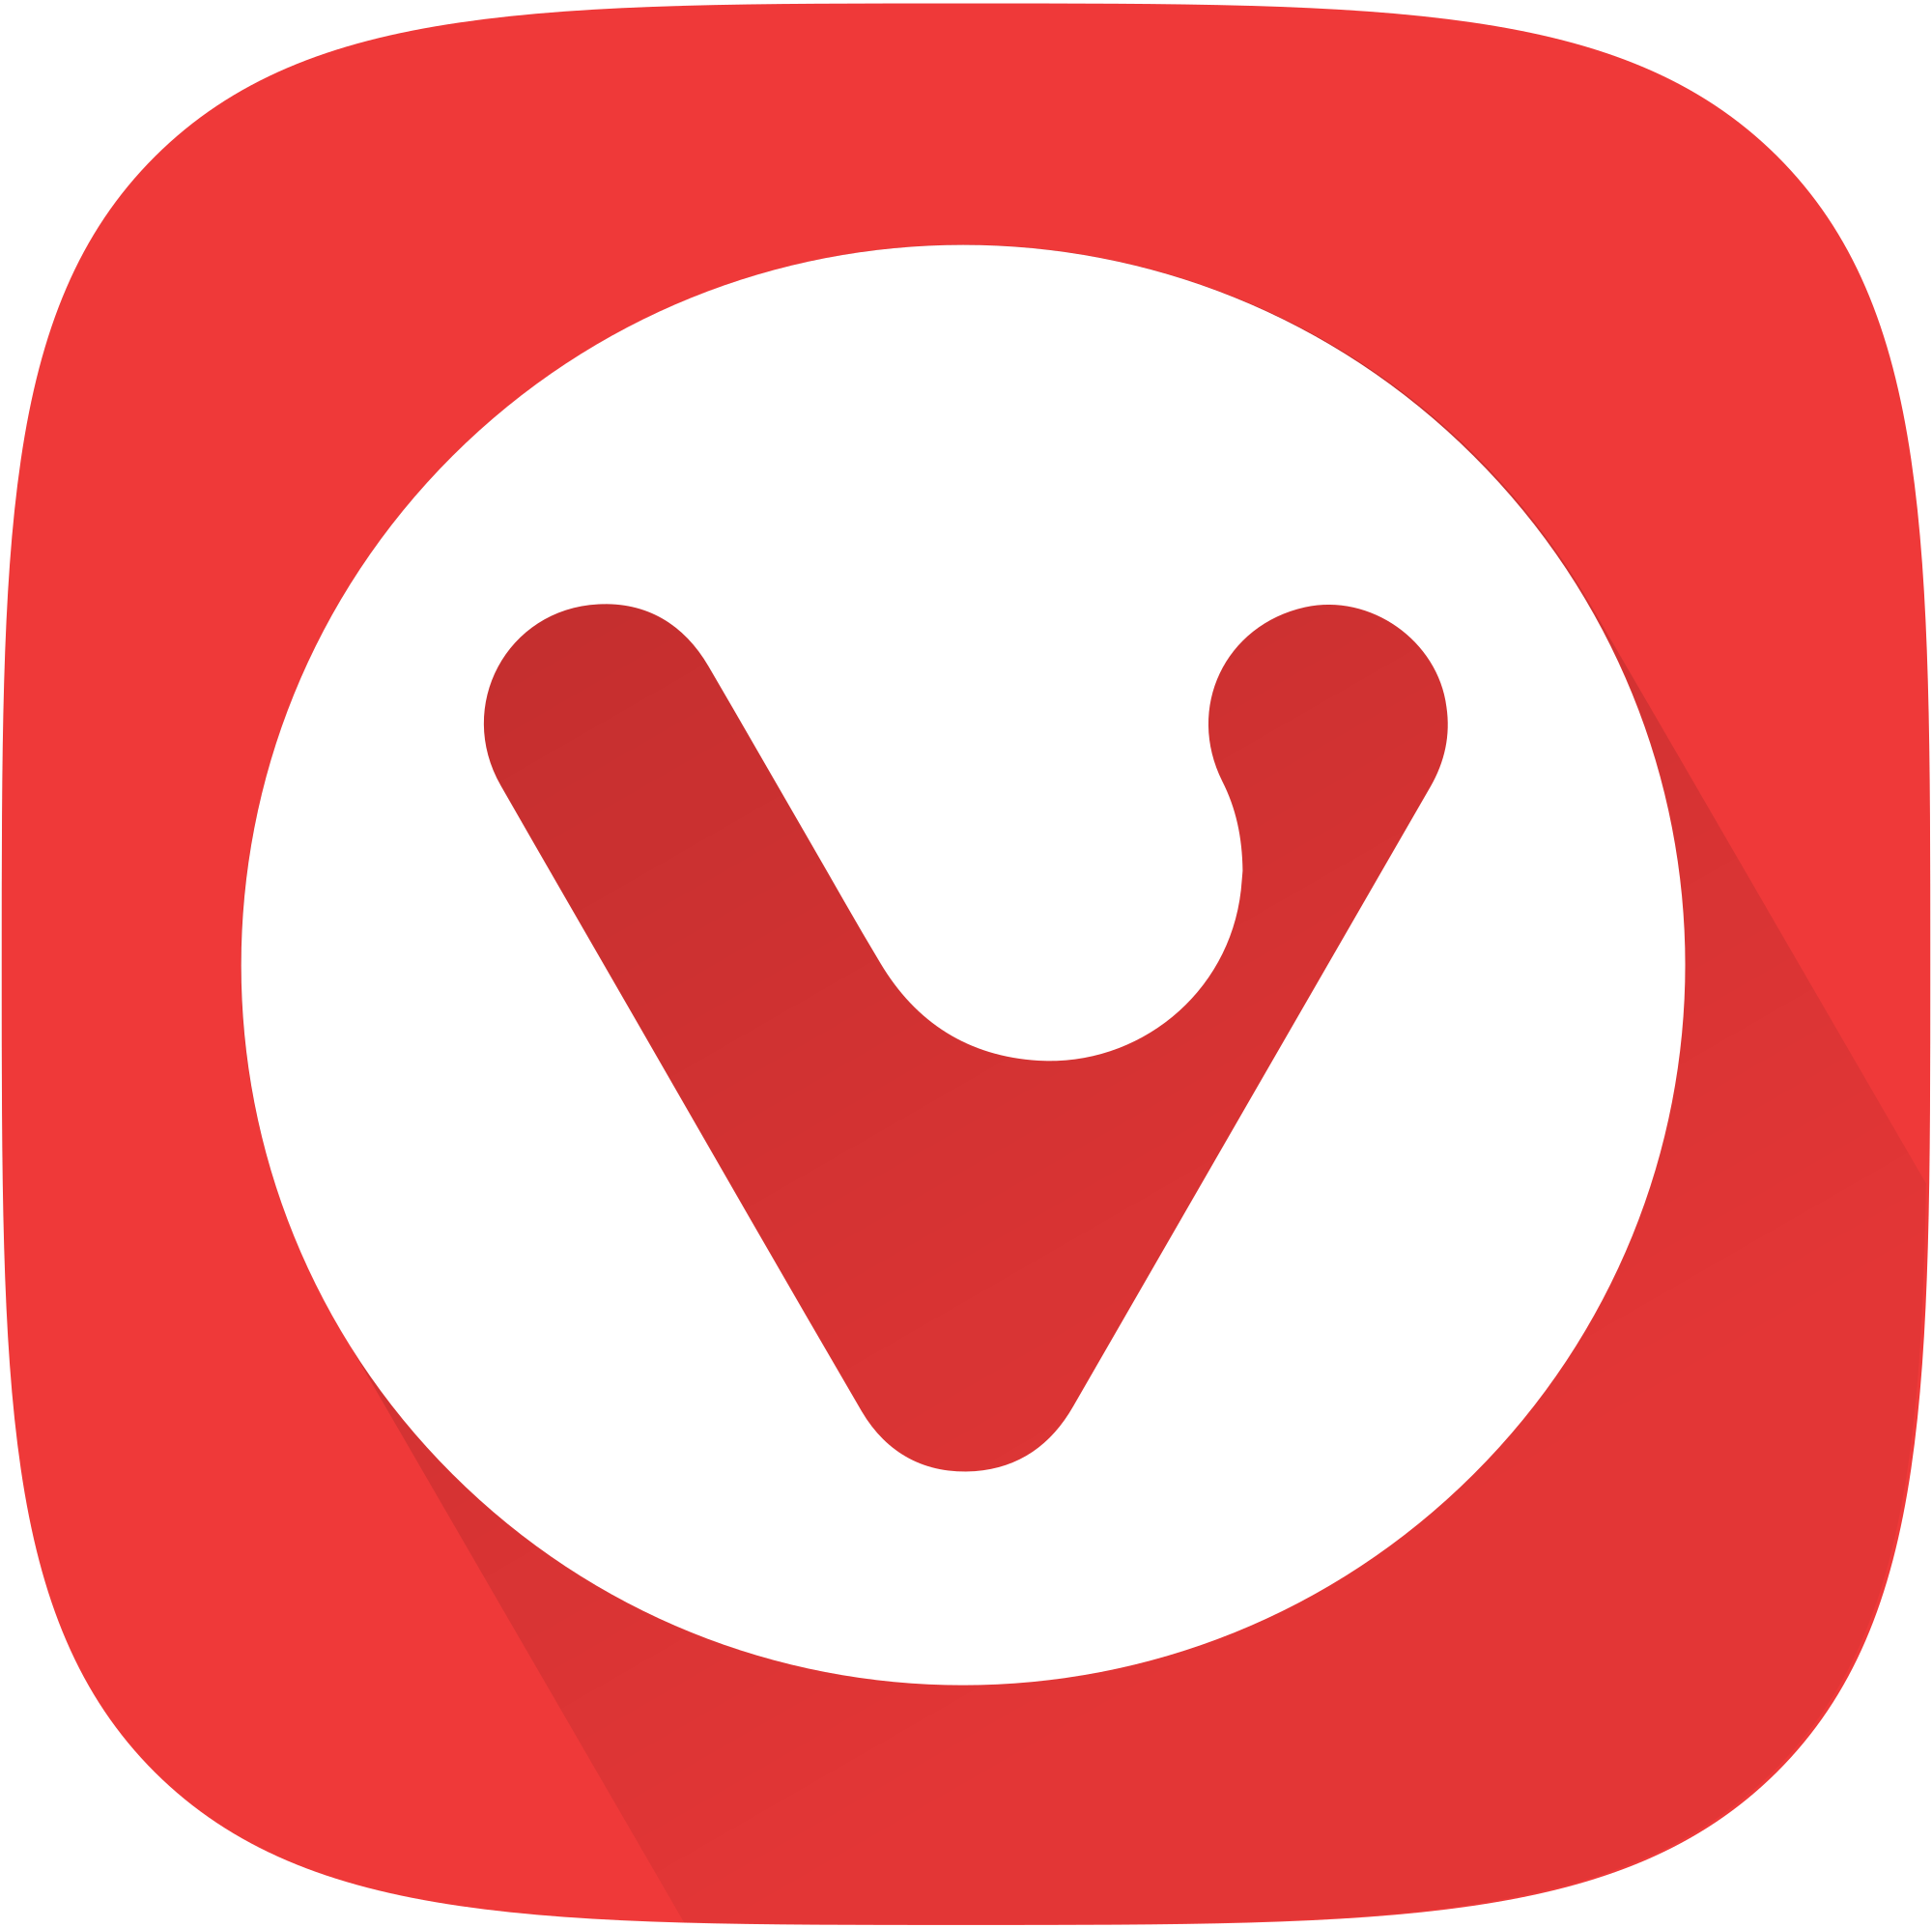 The Vivaldi icon - a red V in the center of a white circle placed on a red background.